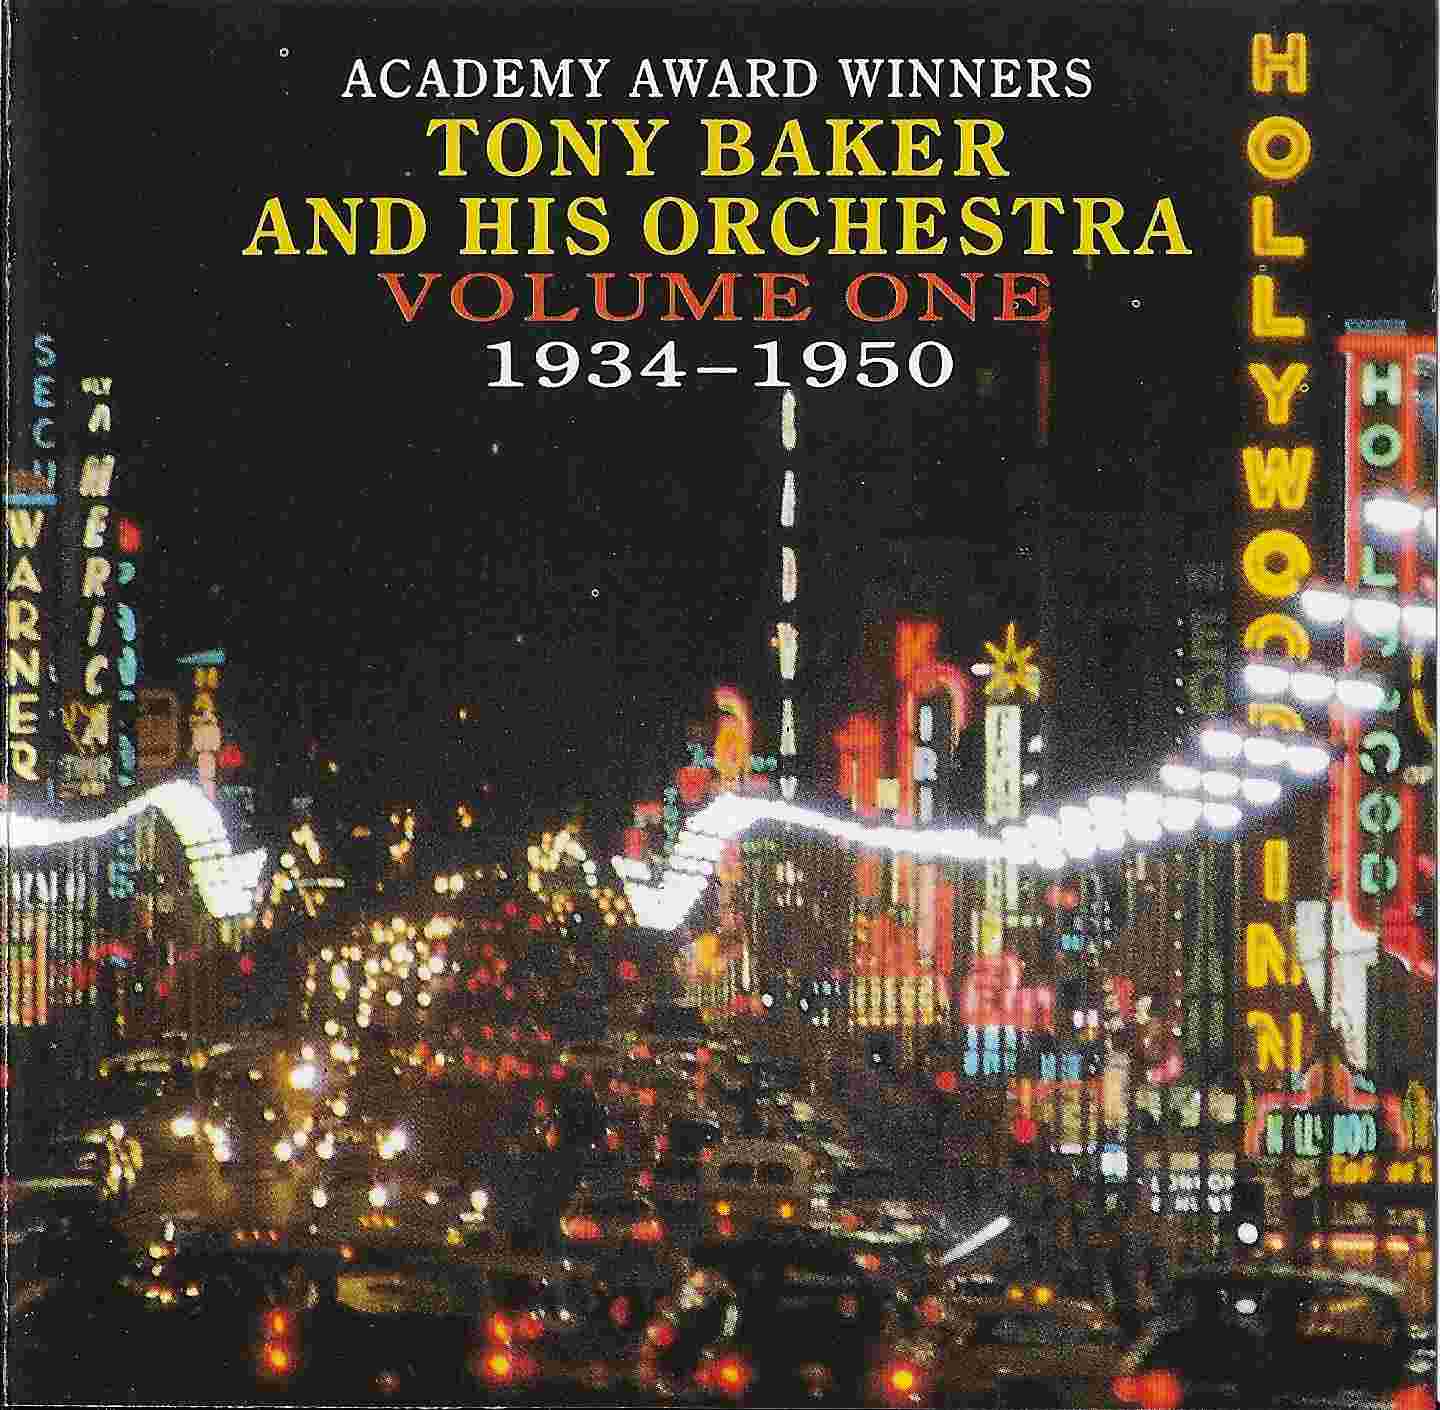 Picture of PWKS 655 Academy award winners - Tony Baker and his orchestra, volume one 1934 - 1950 by artist Tony Baker from the BBC cds - Records and Tapes library